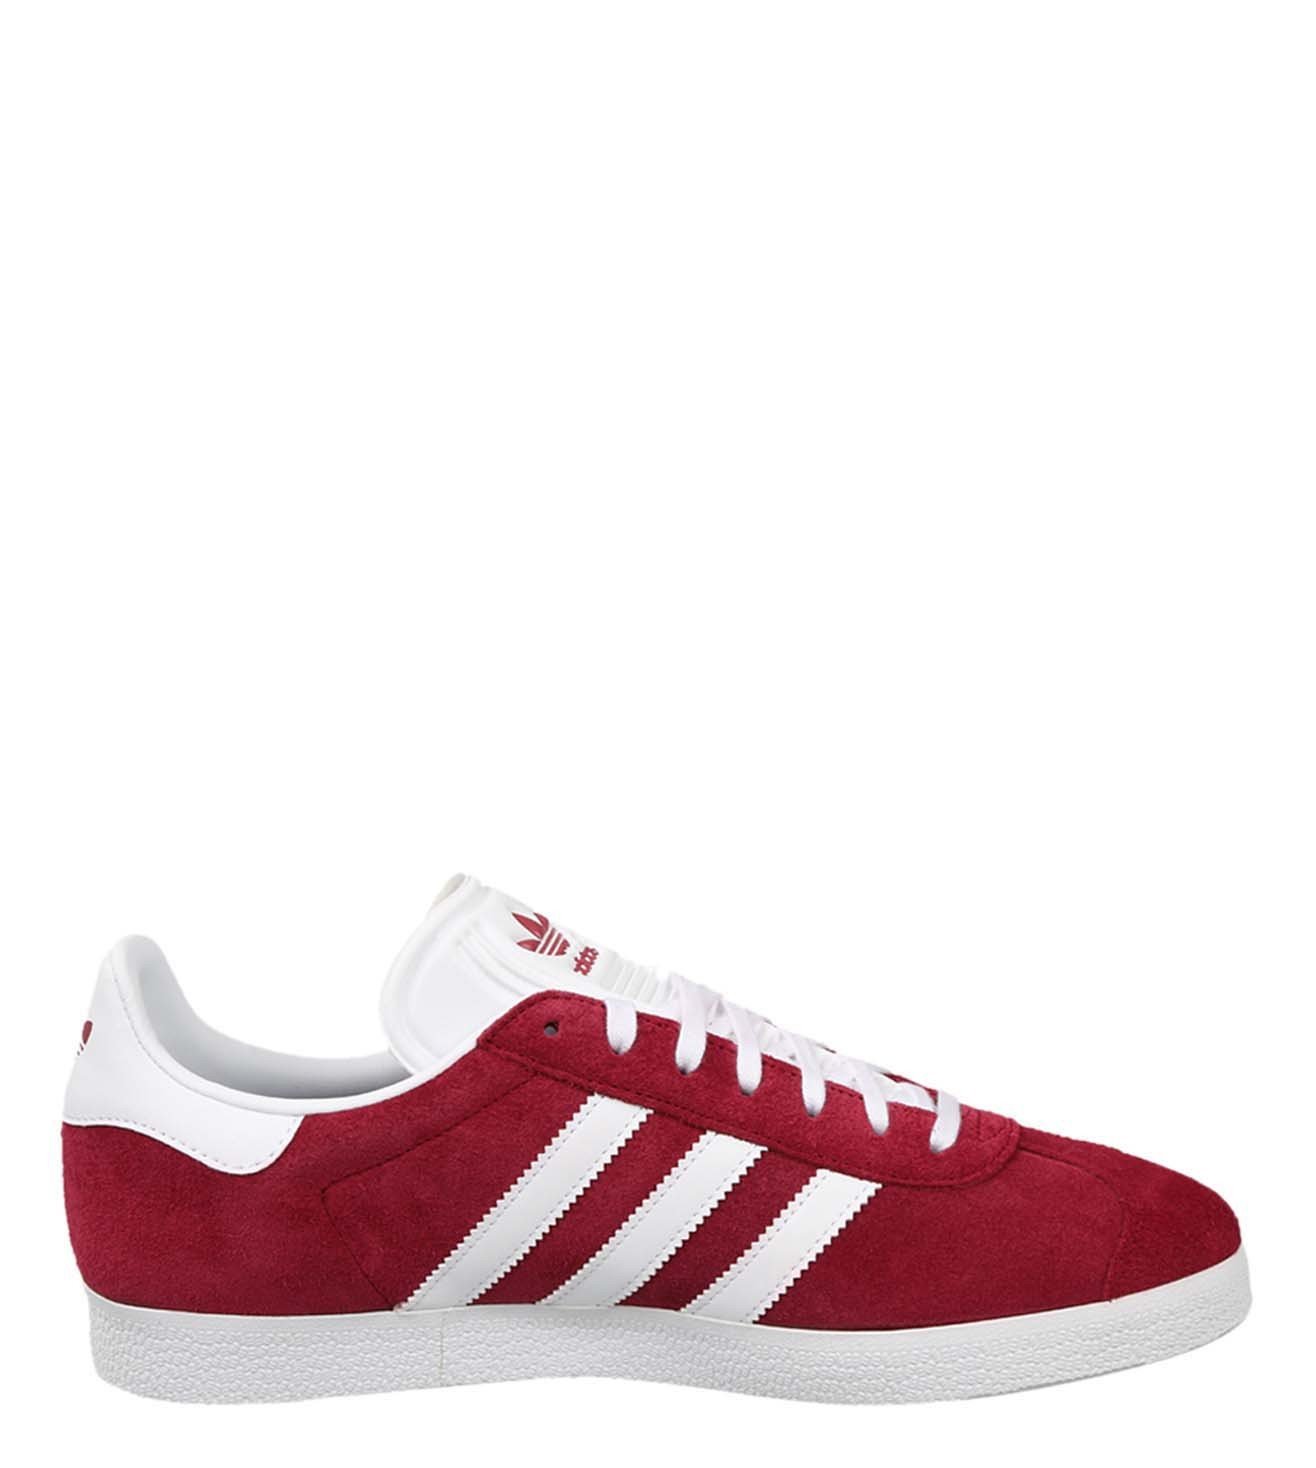 Buy Adidas Originals Red Gazelle Men Sneakers only at Tata CLiQ Luxury